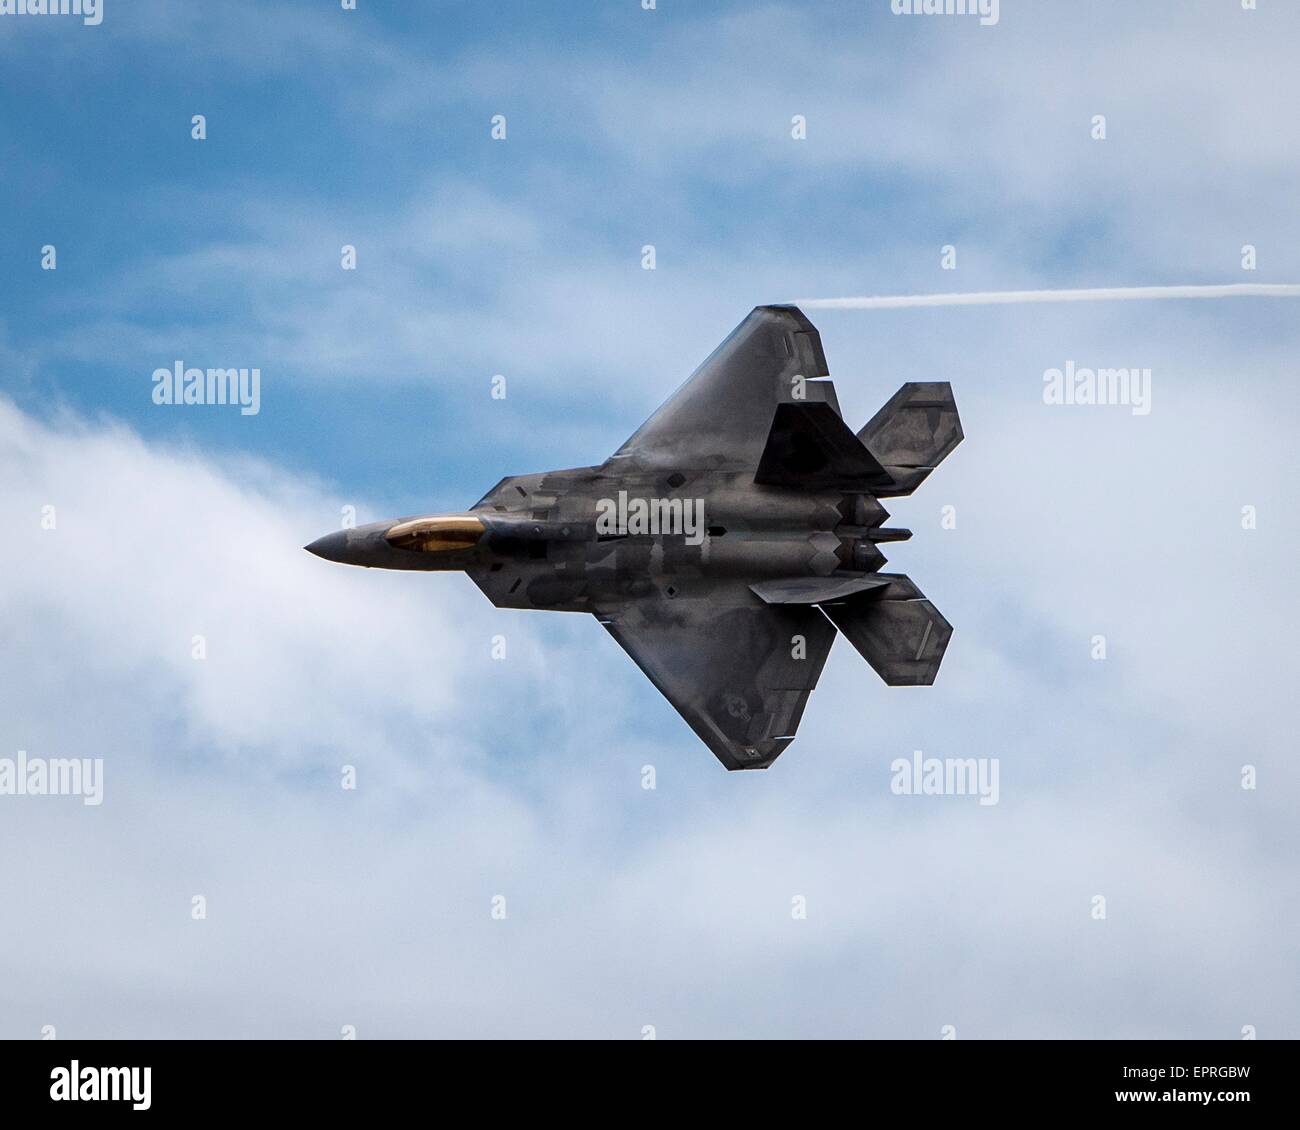 A U.S. Air Force F-22 Raptor stealth fighter aircraft during the Wings Over the Pacific air show September 28, 2014 over Honolulu, Hawaii. Stock Photo